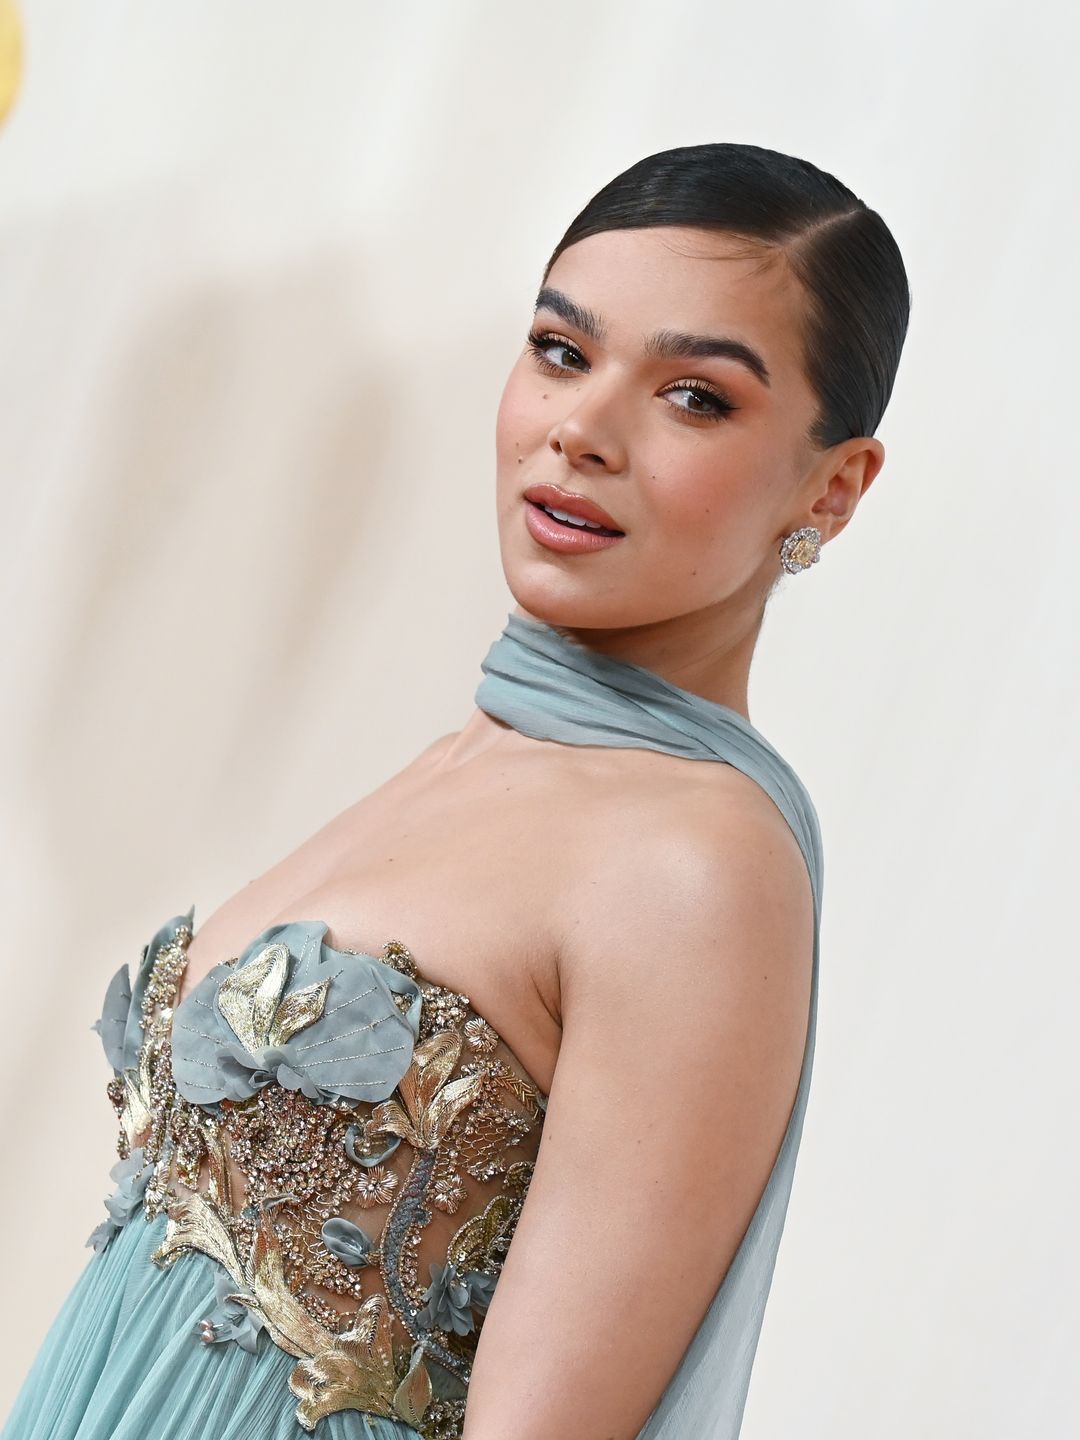 Hailee Steinfeld wearing a strapless gown at the Oscars